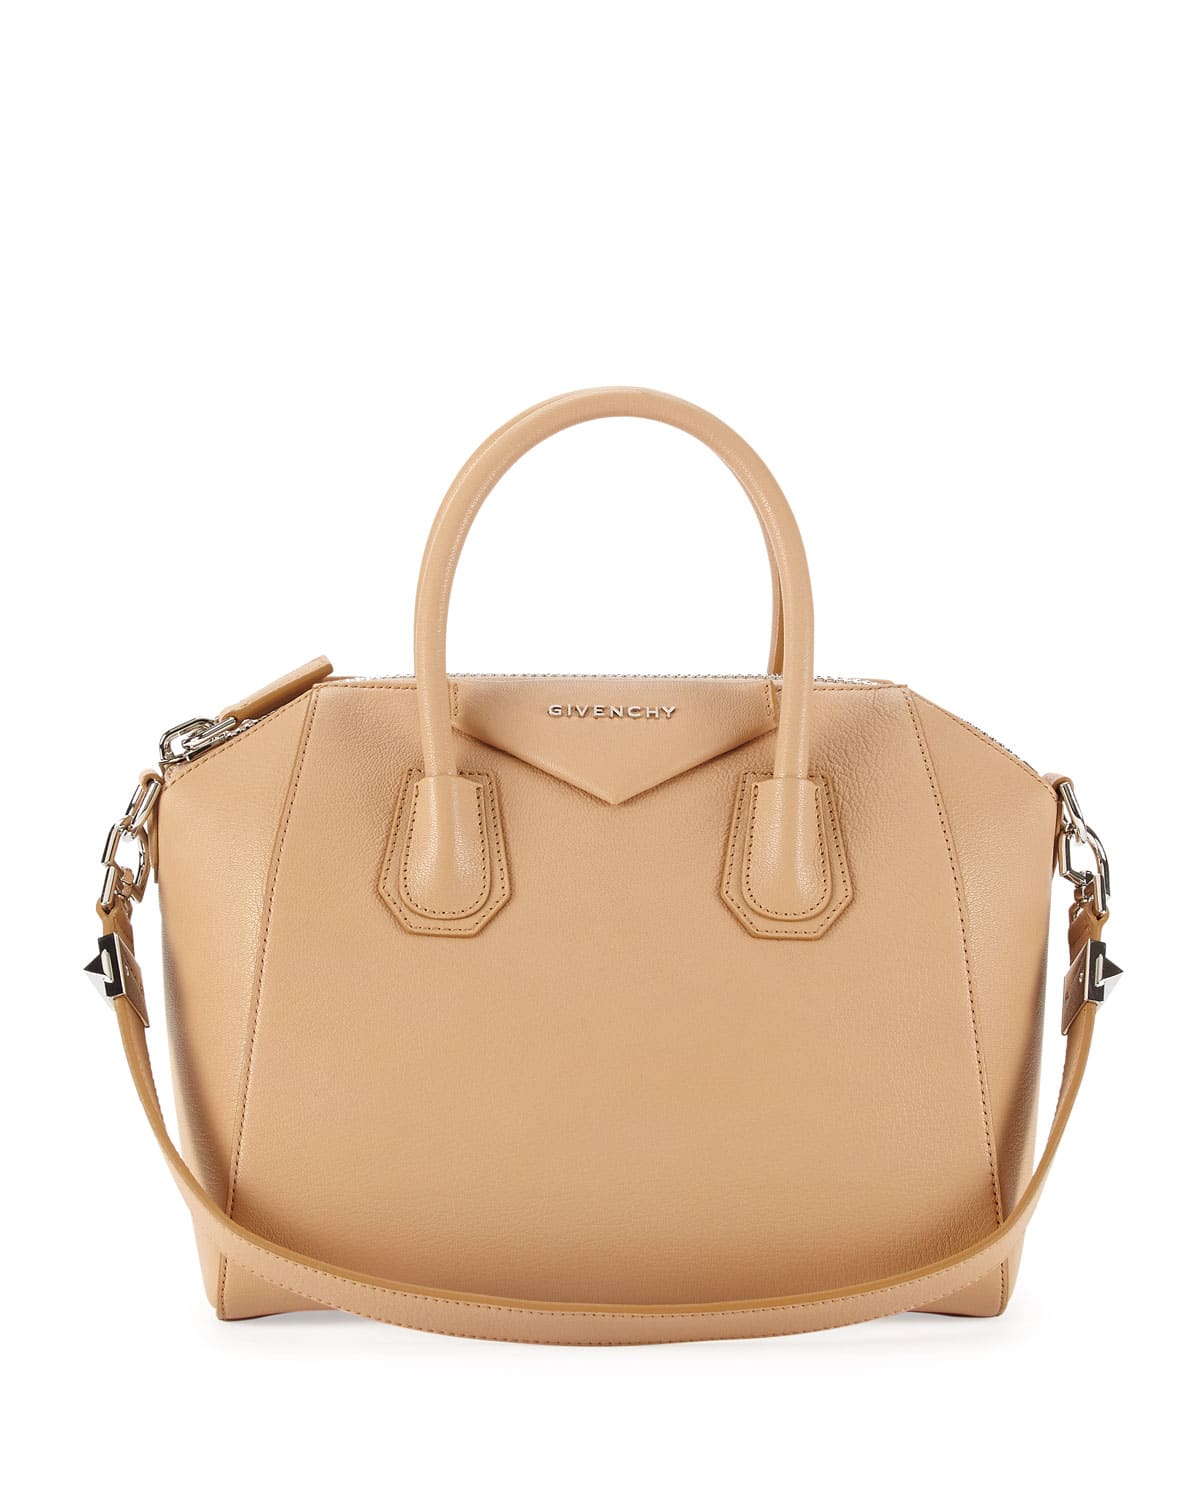 More Givenchy Pre-fall 2014 Bags including More Mini Antigona Styles – Spotted Fashion